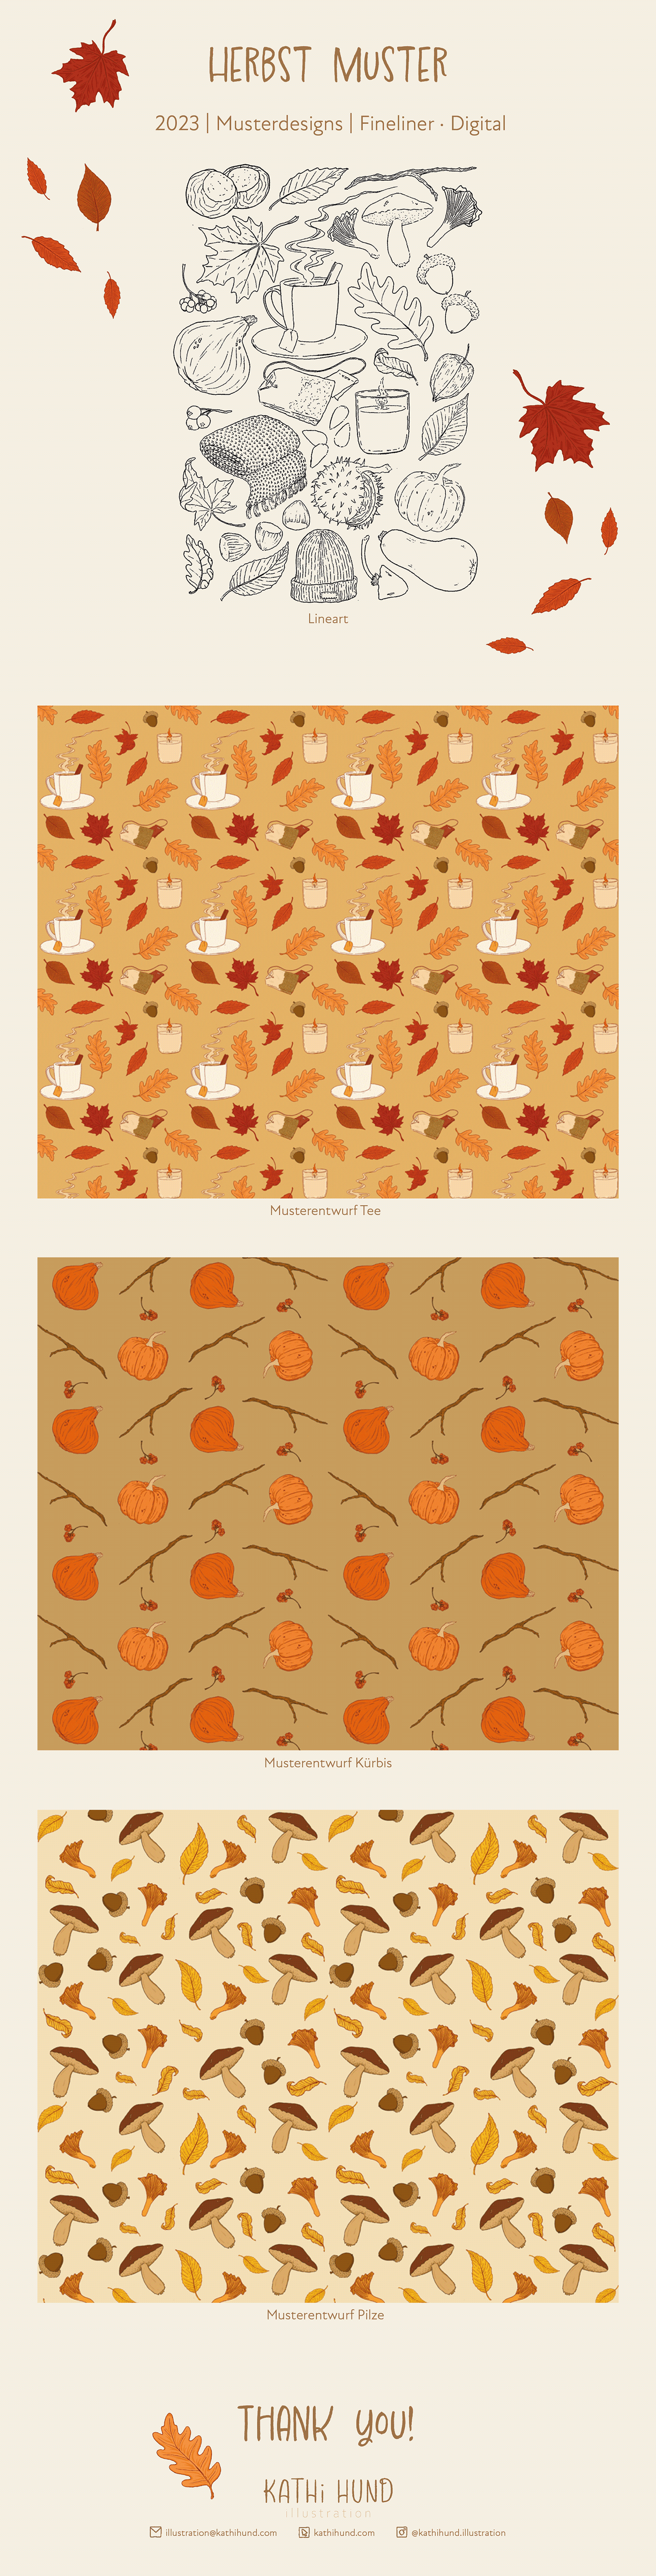 pattern pattern design  muster pattern making papeterie Stationery Fall autumn leaves nature illustration